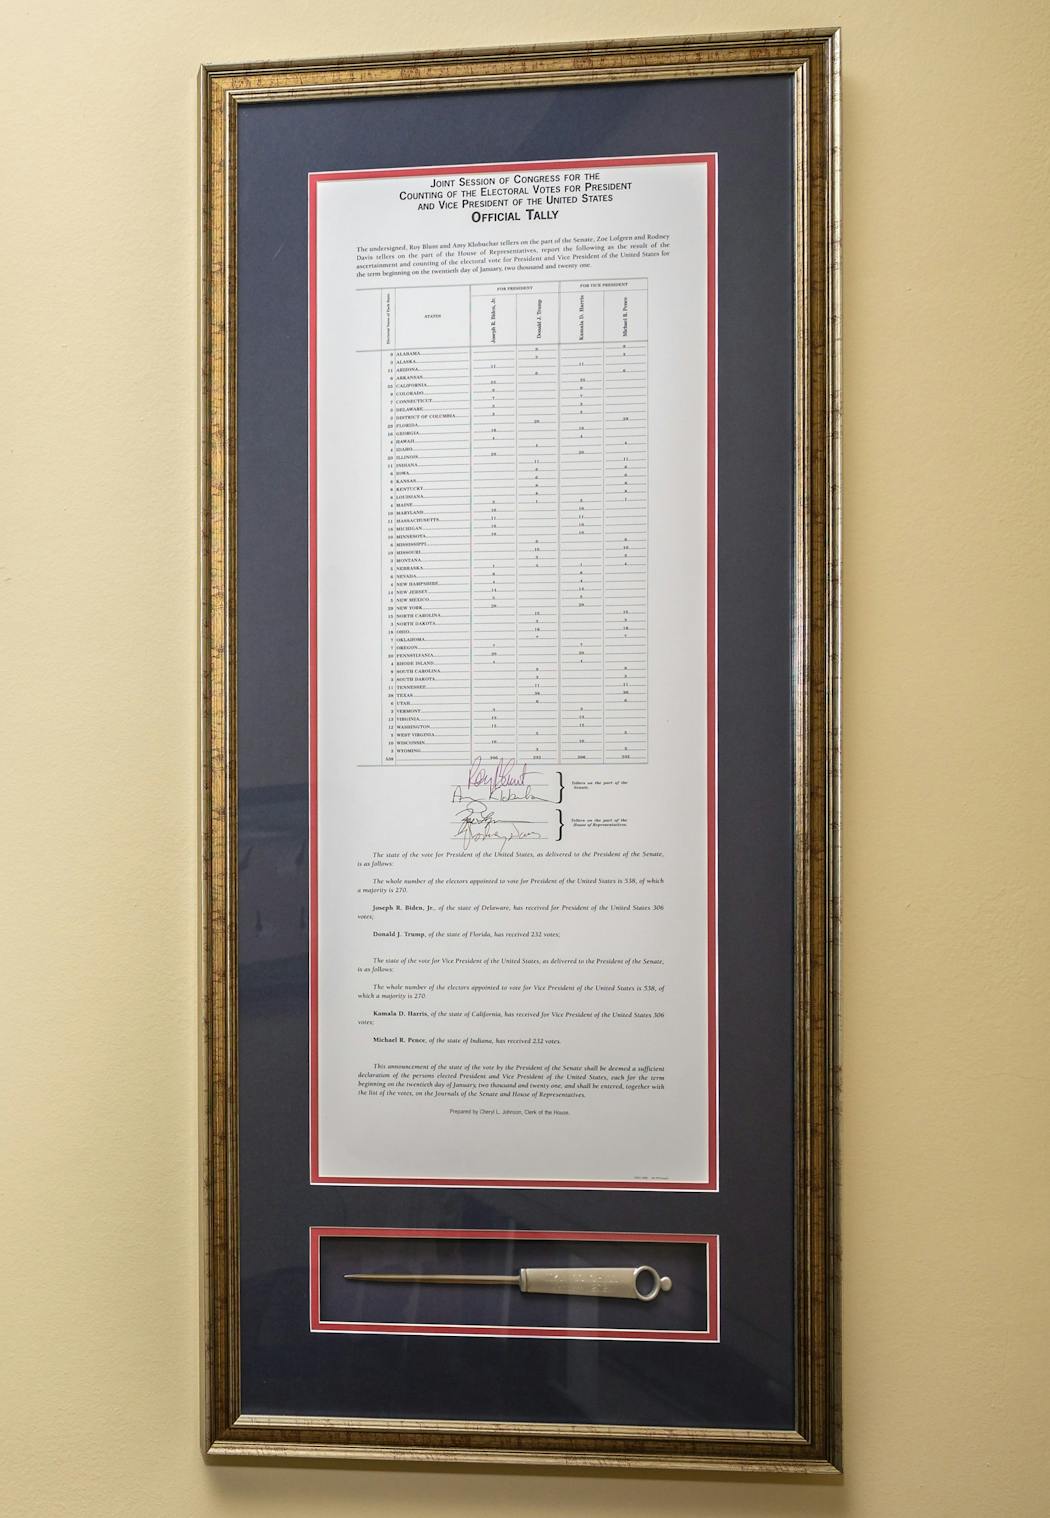 A framed electoral vote count tally of Biden's 2020 win approved by Congress hangs in Klobuchar's office.